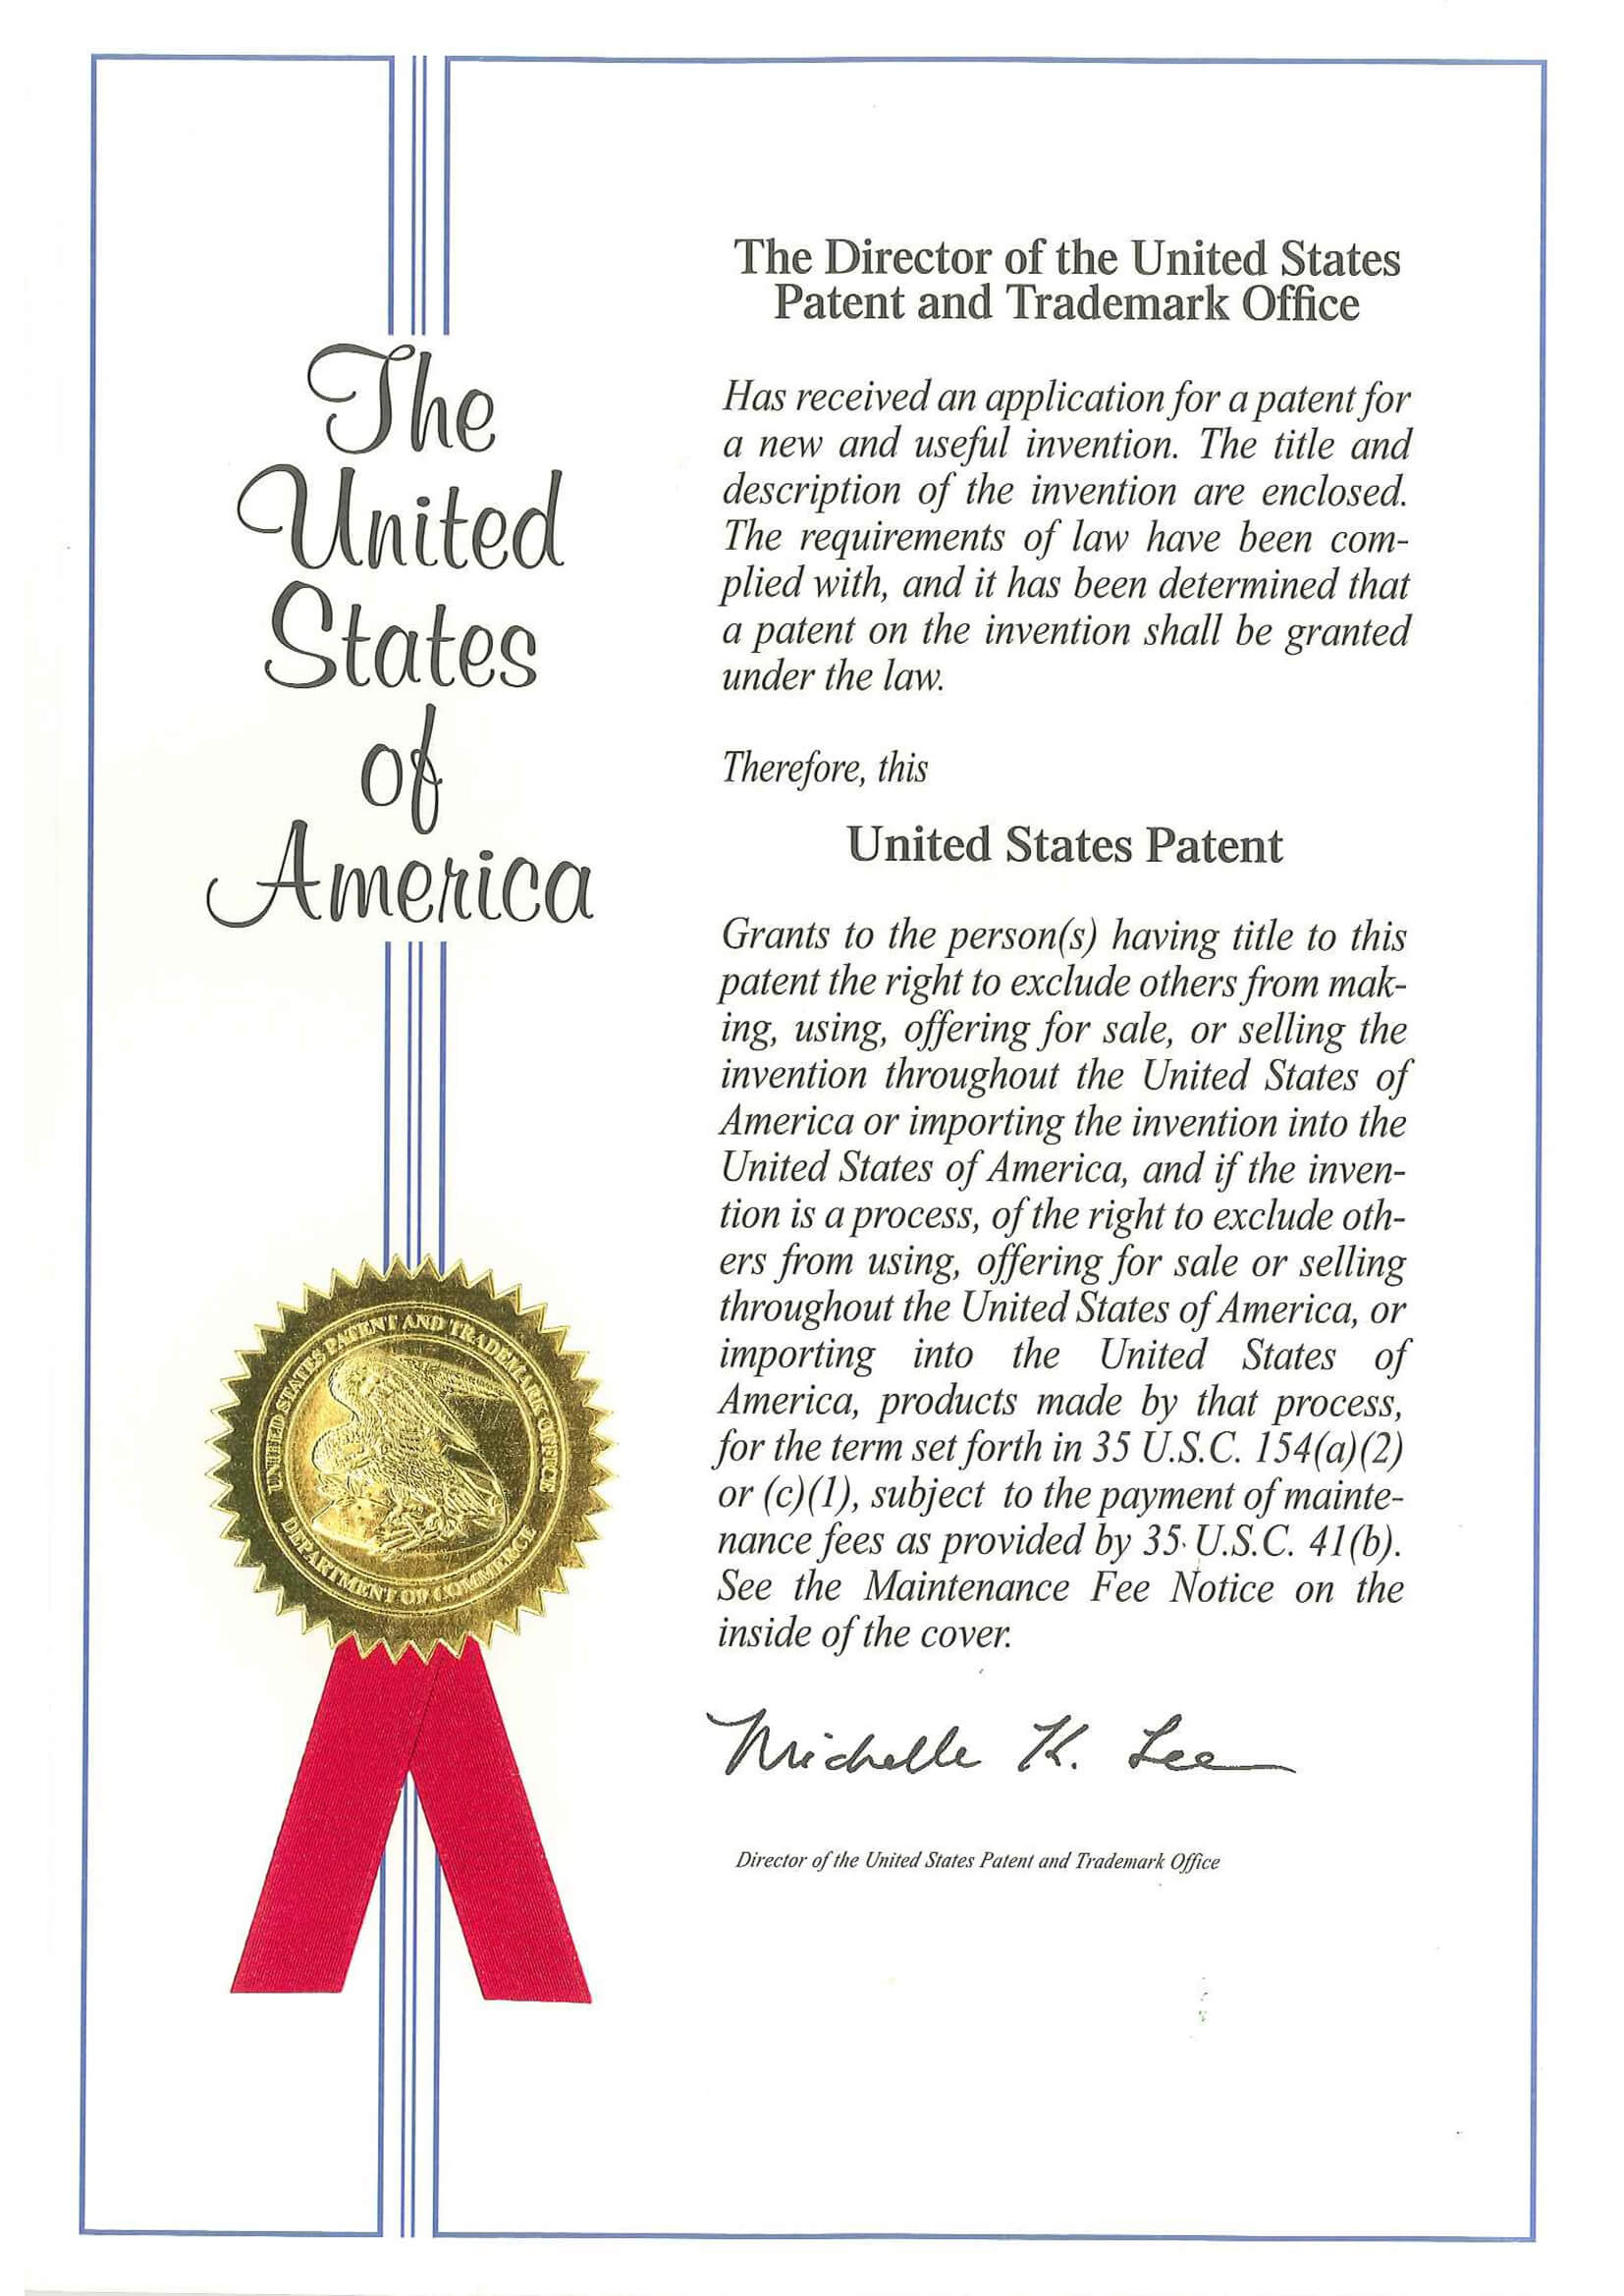 United States Patent (LED display module with quick mounting-dismounting structure)